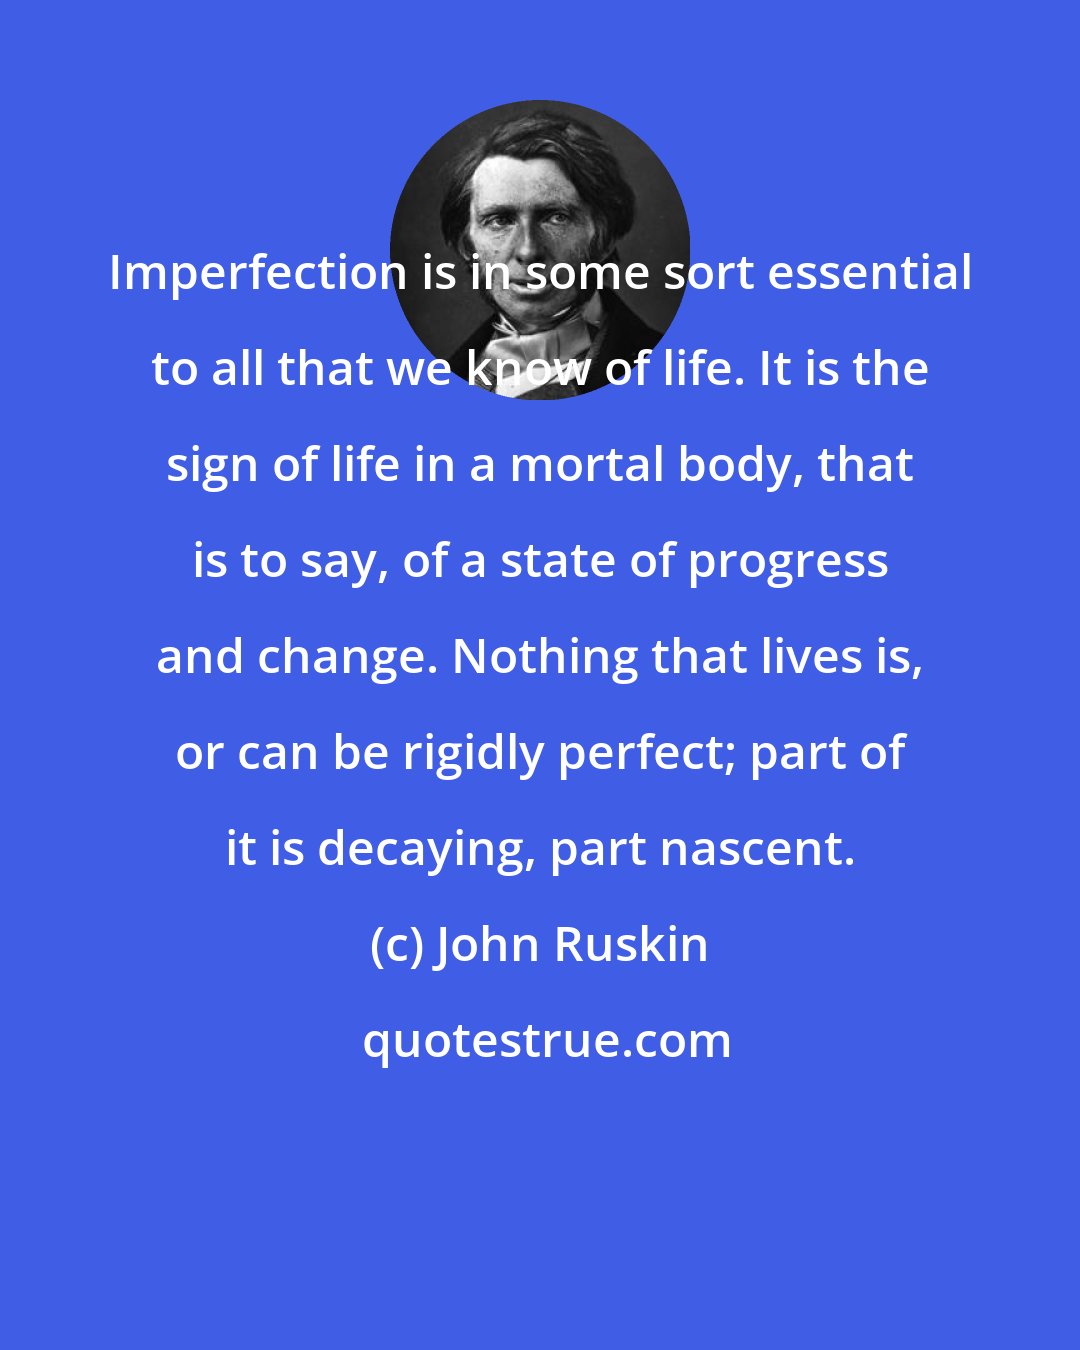 John Ruskin: Imperfection is in some sort essential to all that we know of life. It is the sign of life in a mortal body, that is to say, of a state of progress and change. Nothing that lives is, or can be rigidly perfect; part of it is decaying, part nascent.